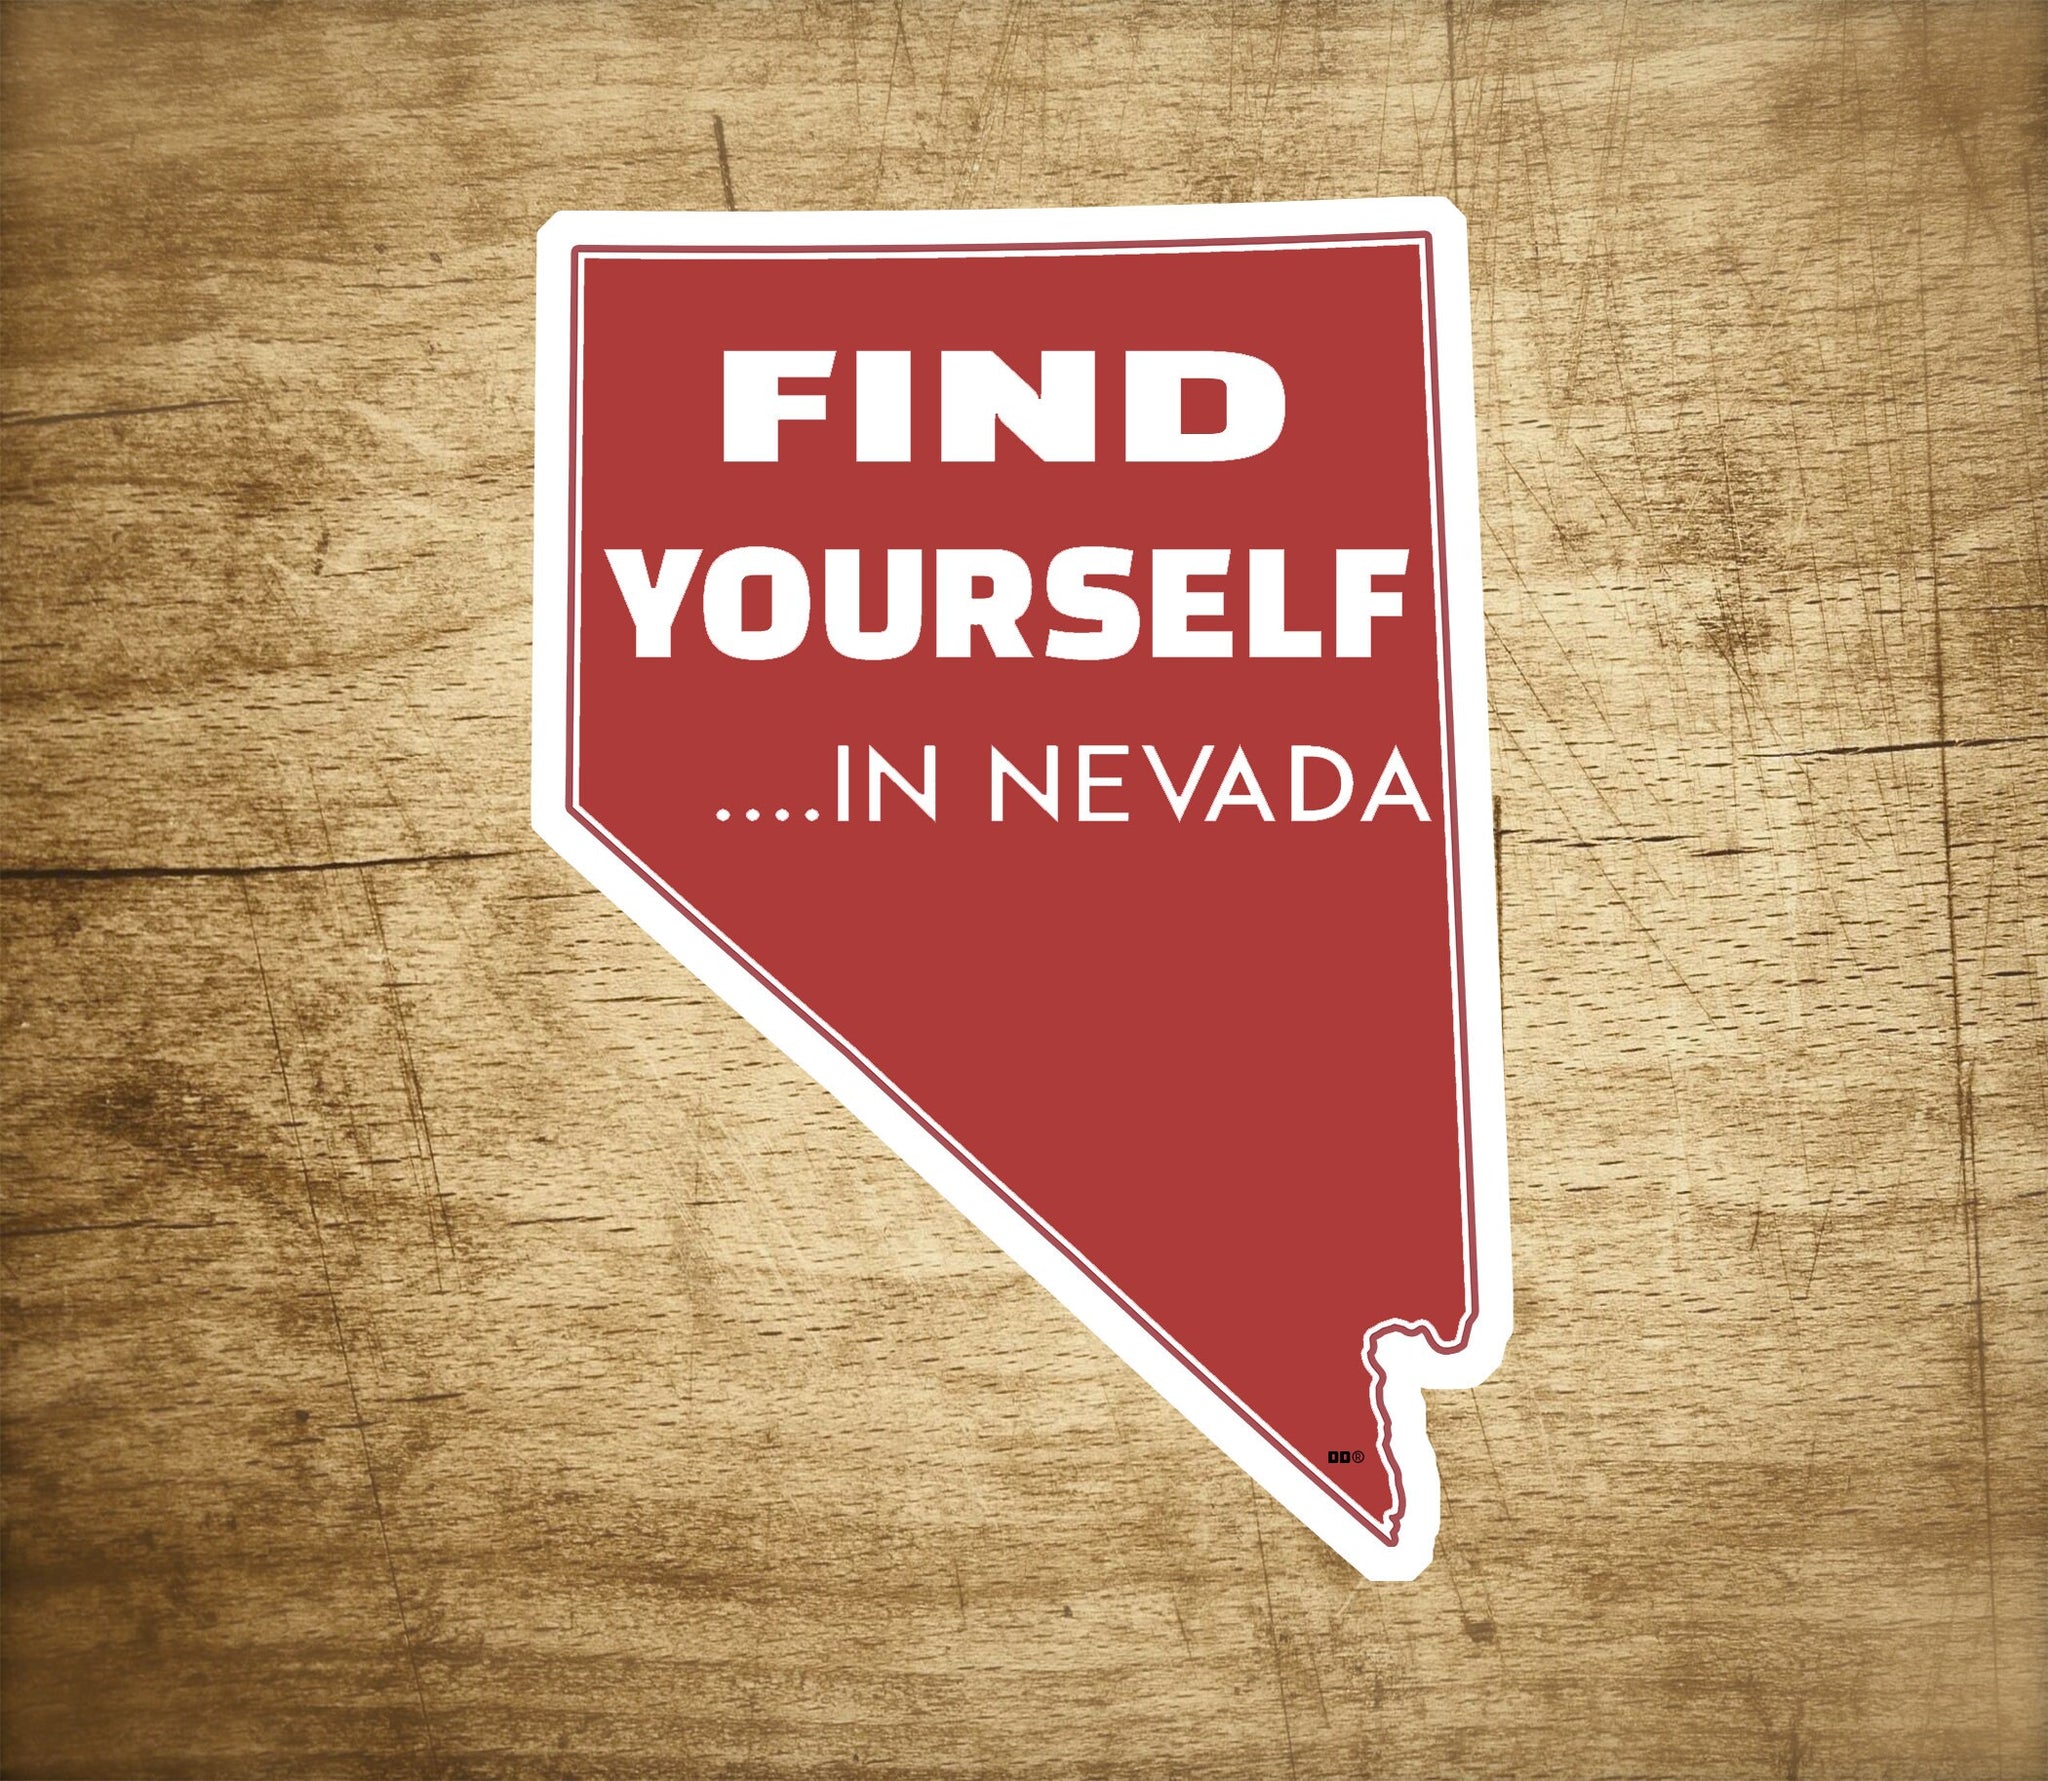 Find Yourself In Nevada Decal Sticker 3.75" Las Vegas Reno Tahoe Red Rock Hoover Dam